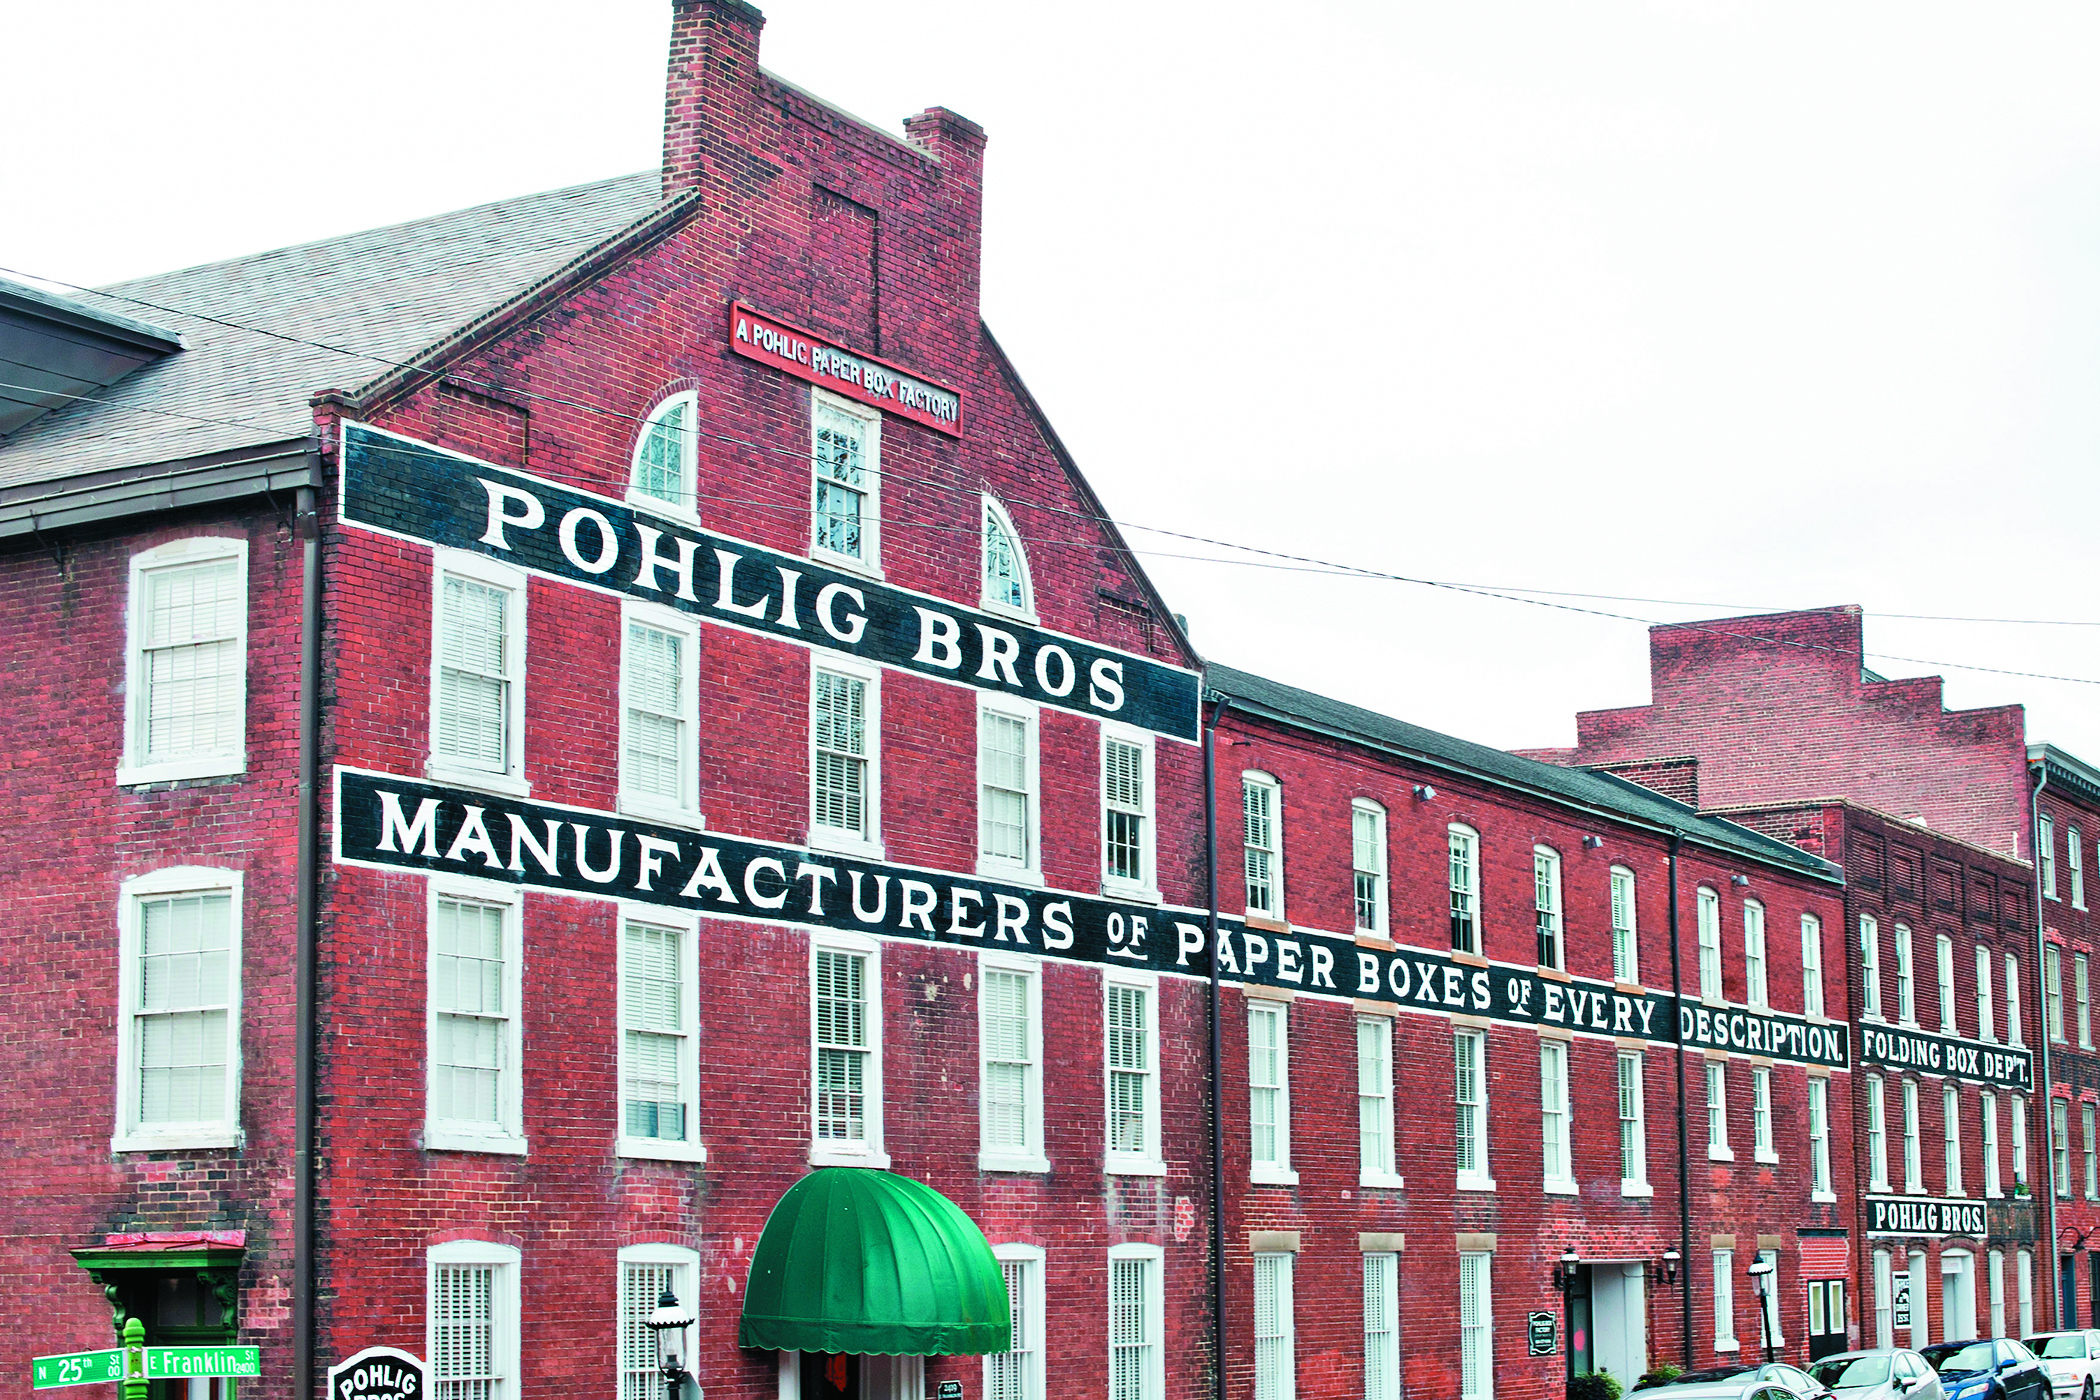 Shelter Salon is in a pre-Civil War building that once housed Pohlig Bros a paper box factory